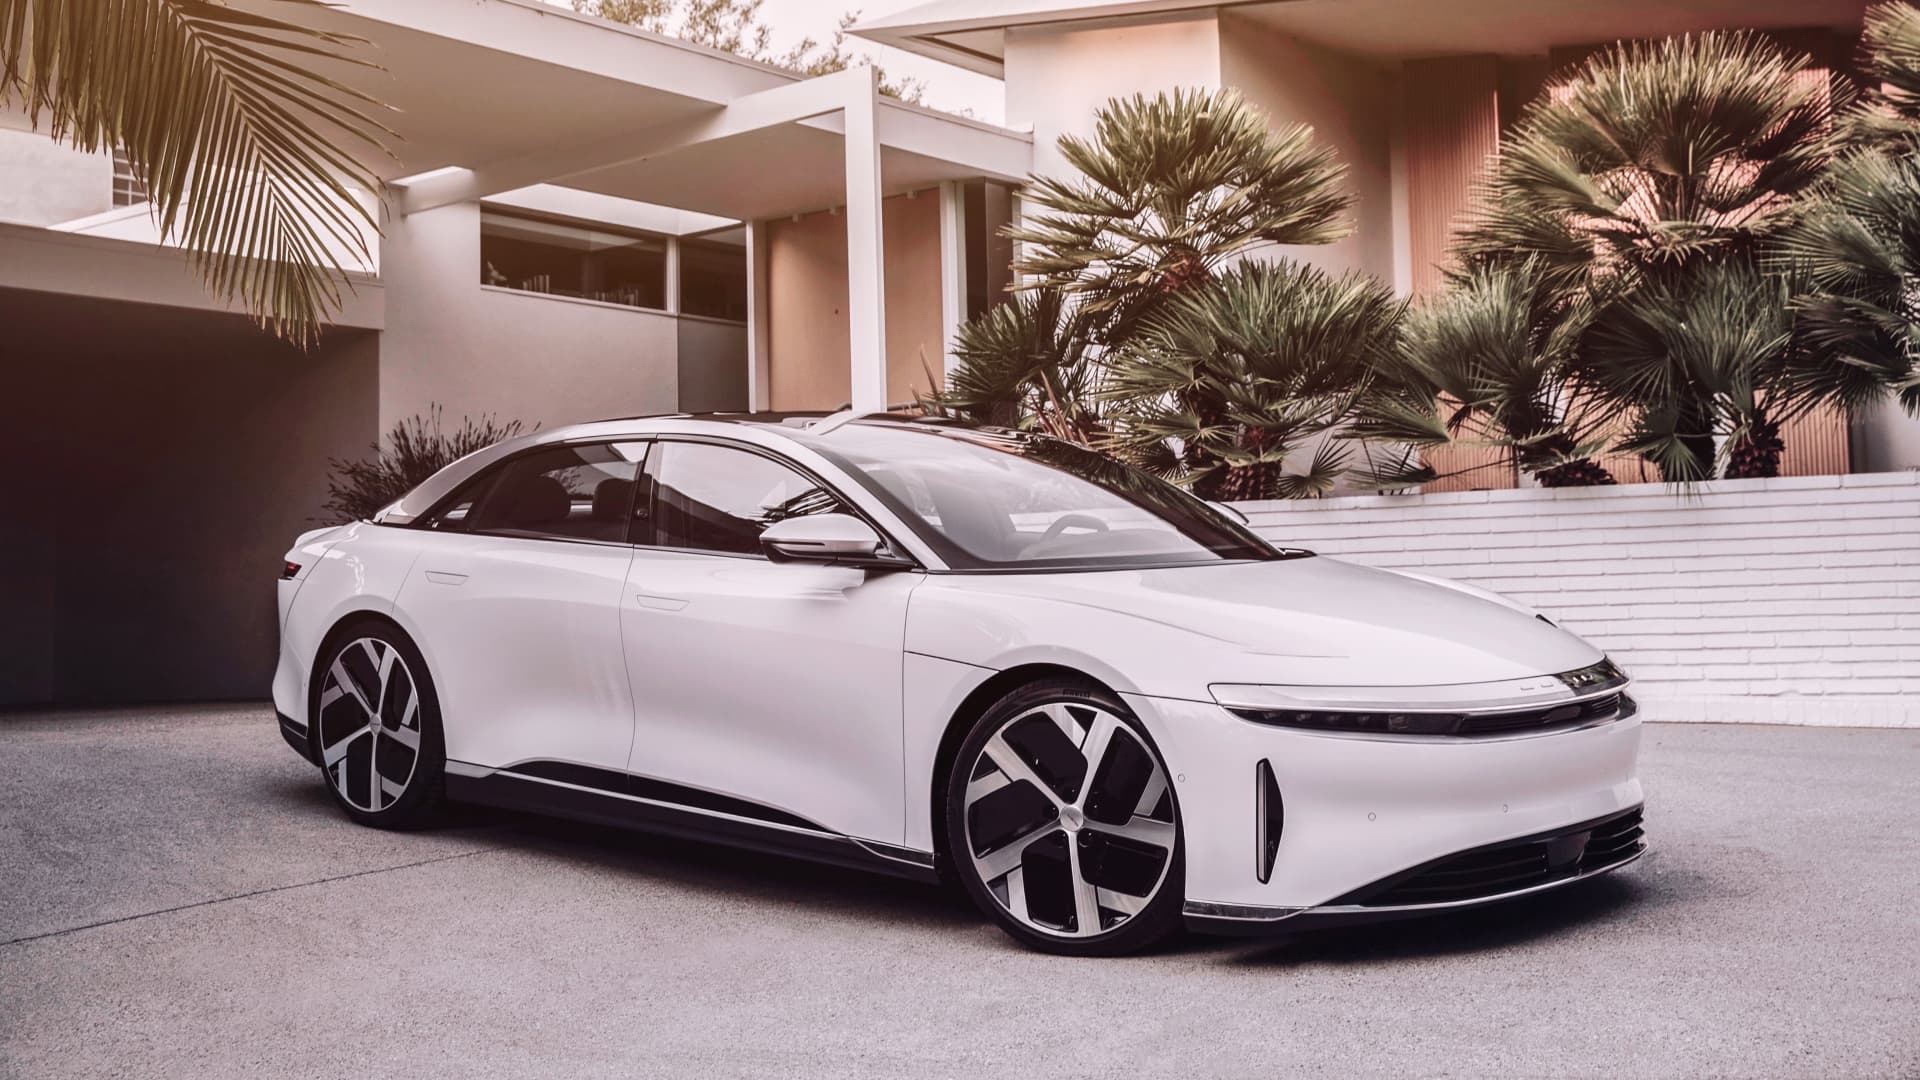 The Lucid Air sedan, which is expected to go into production next year at a plant being constructed in Arizona.